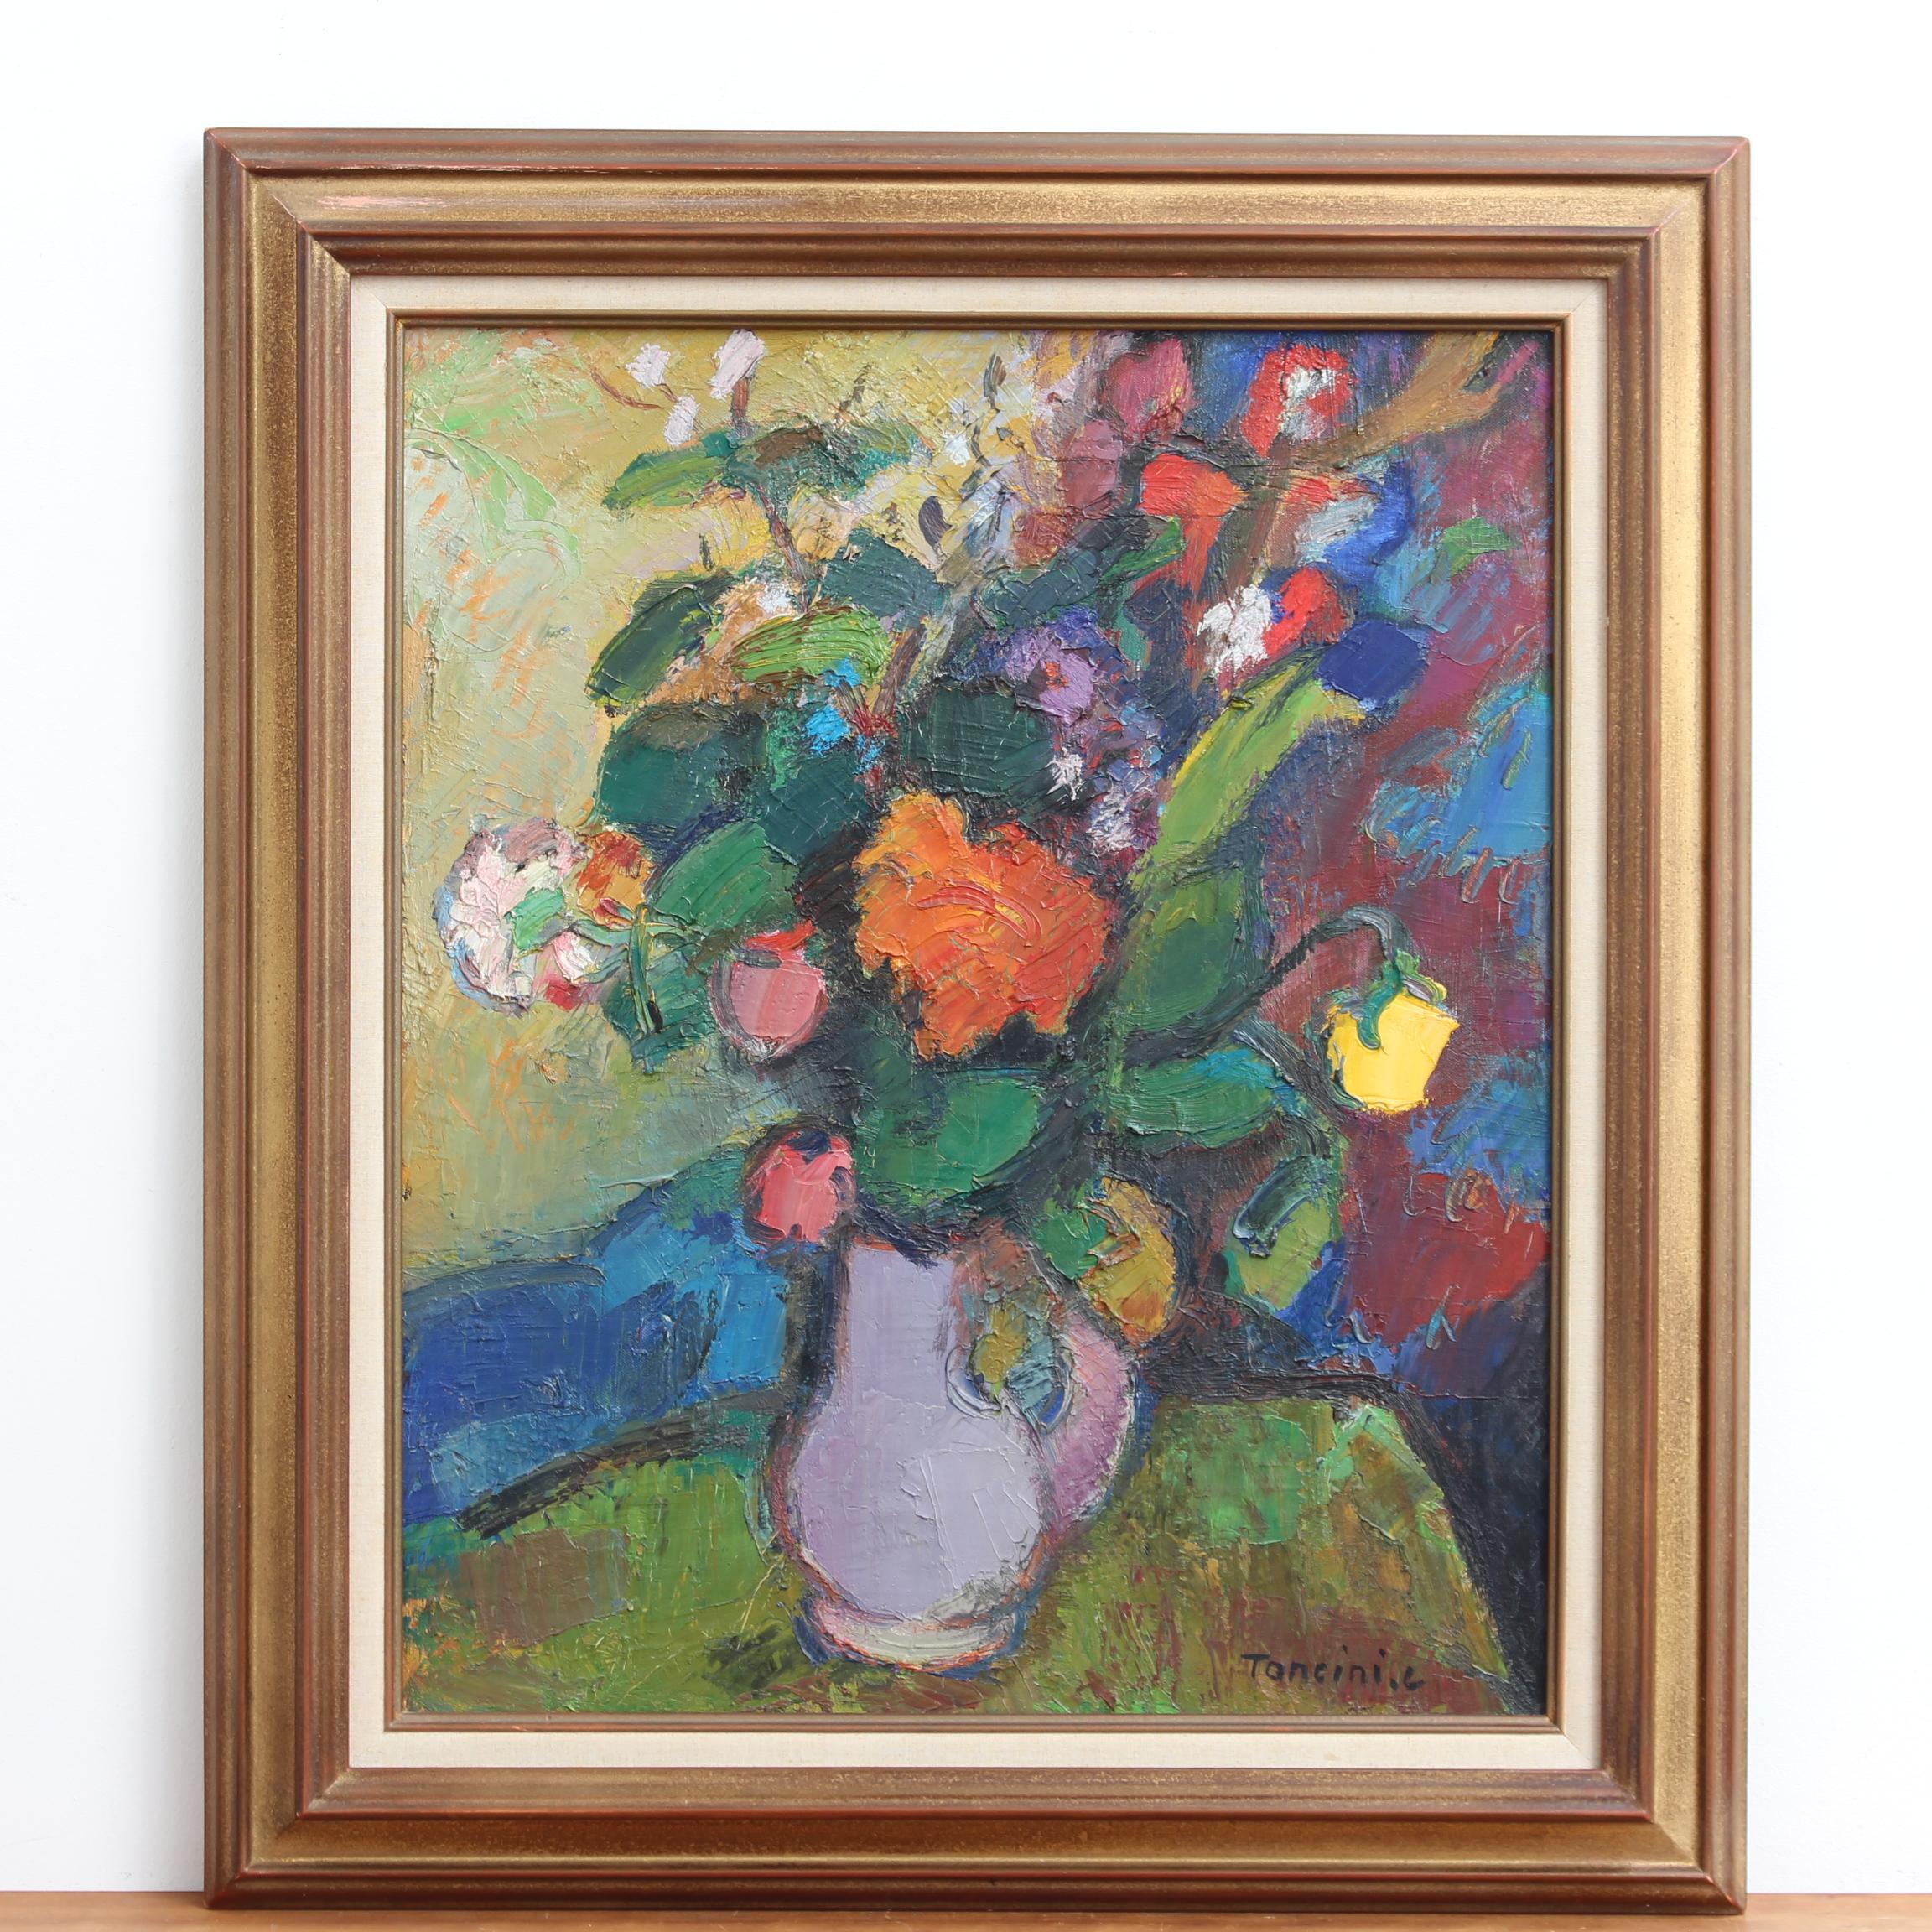 'Bouquet of Flowers', oil on canvas, by Louis Toncini (1980). Painted towards the end of his career, this radiant bouquet of flowers belongs to that part of his body of work which was lighthearted, optimistic and pleasing. It is a captivating still